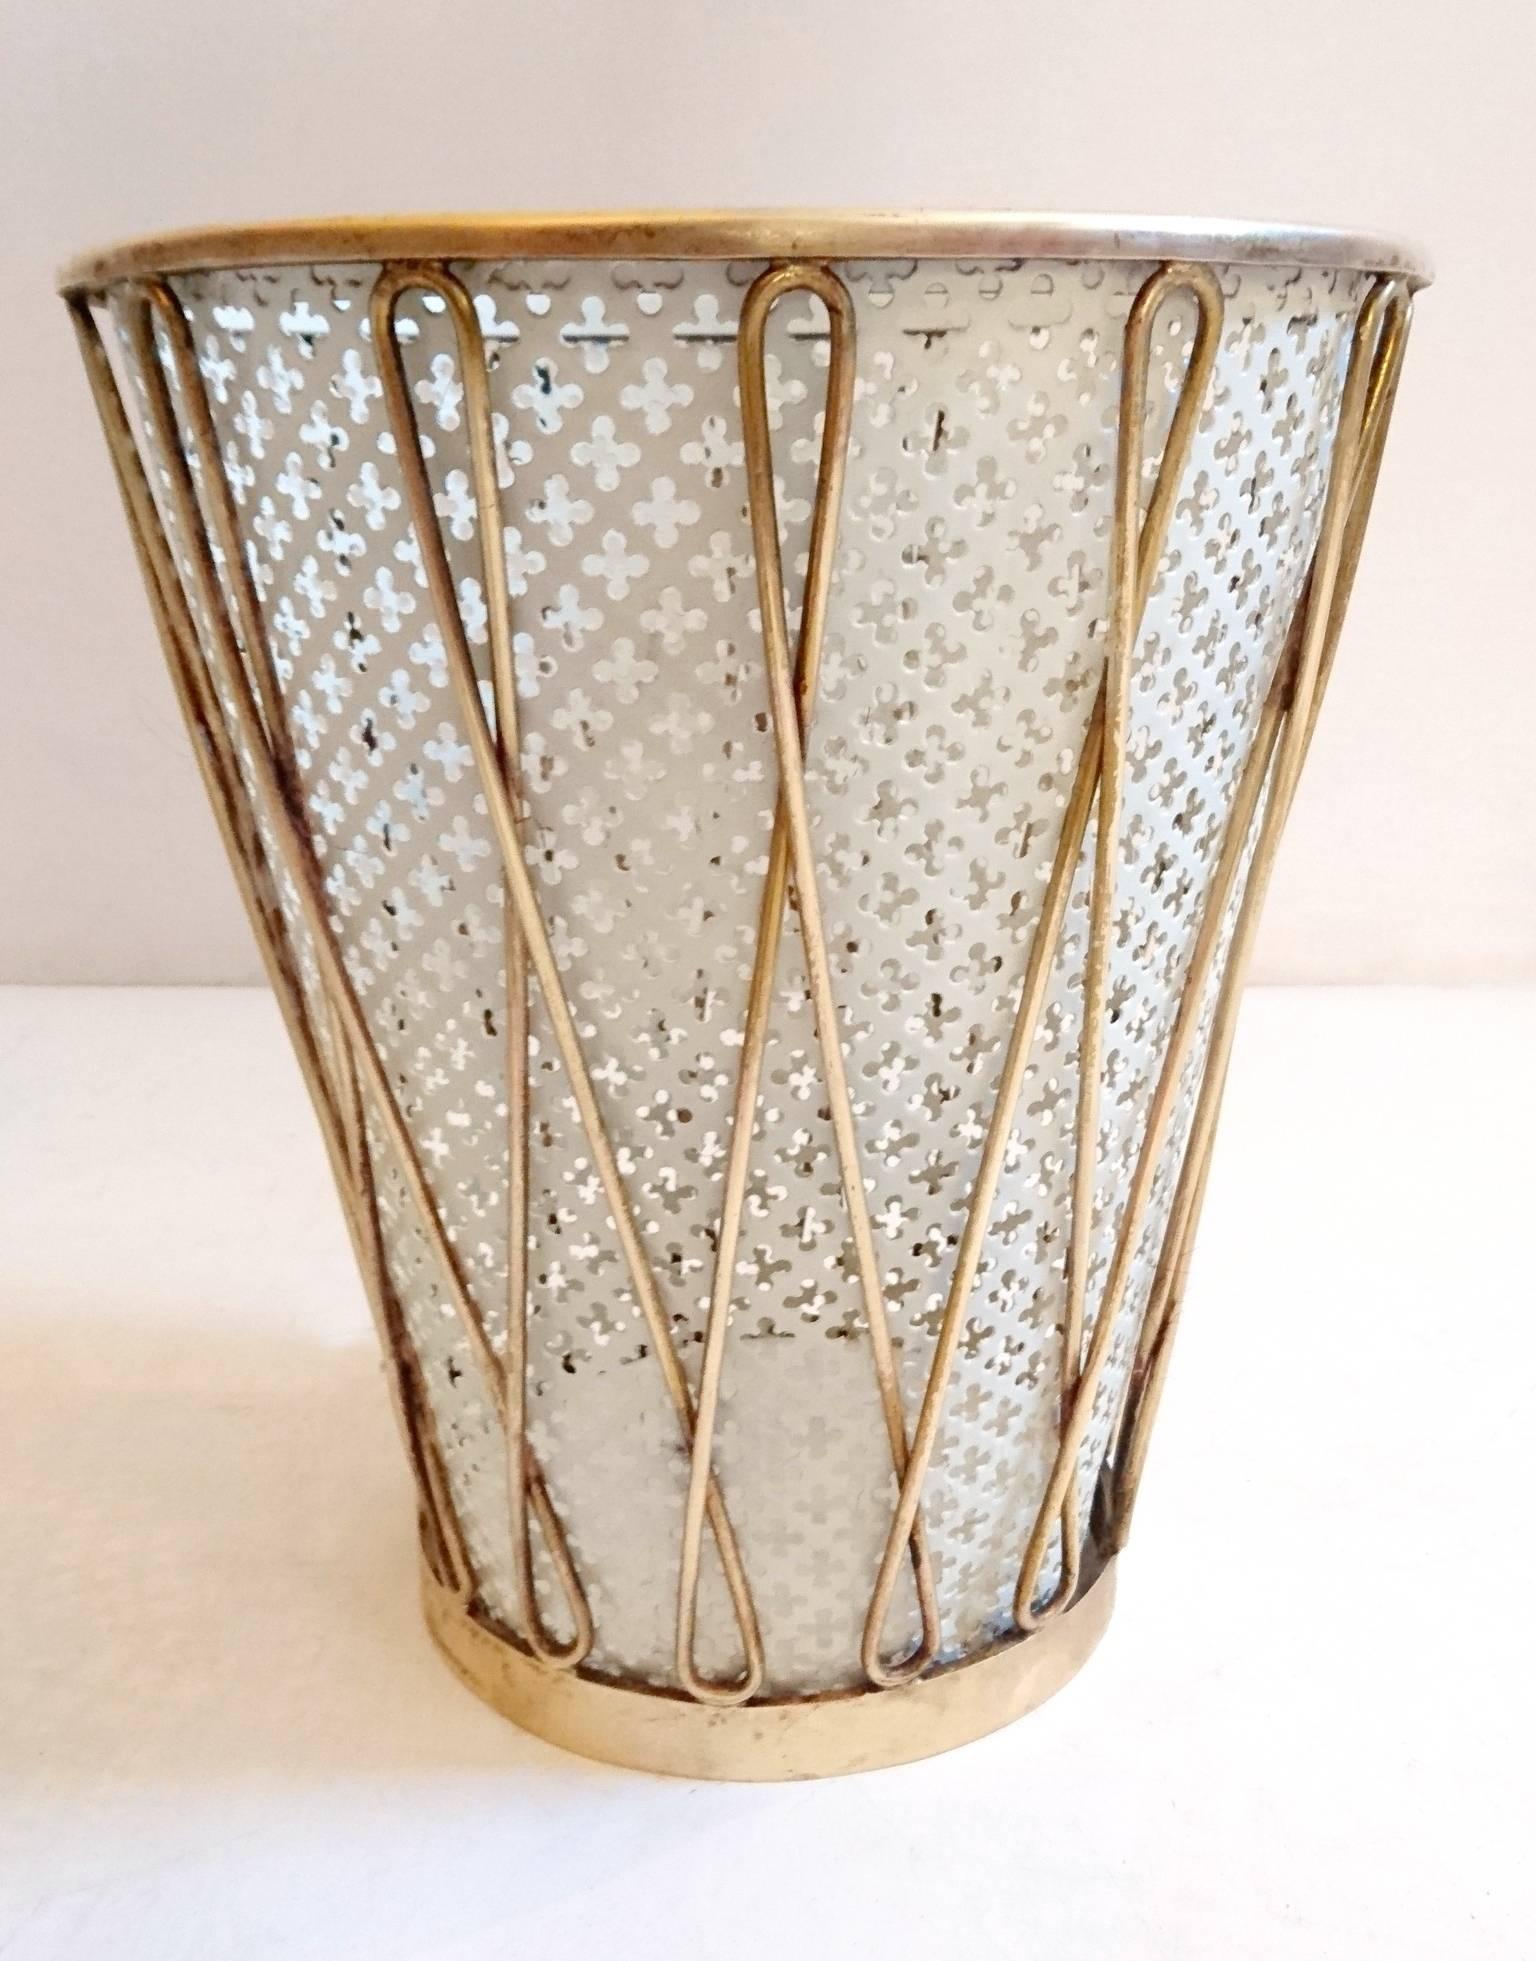 Eegant looking waste paper basket in brass and painted metal made in Italy during the 1950s. One of these has been sold so there is only one left.